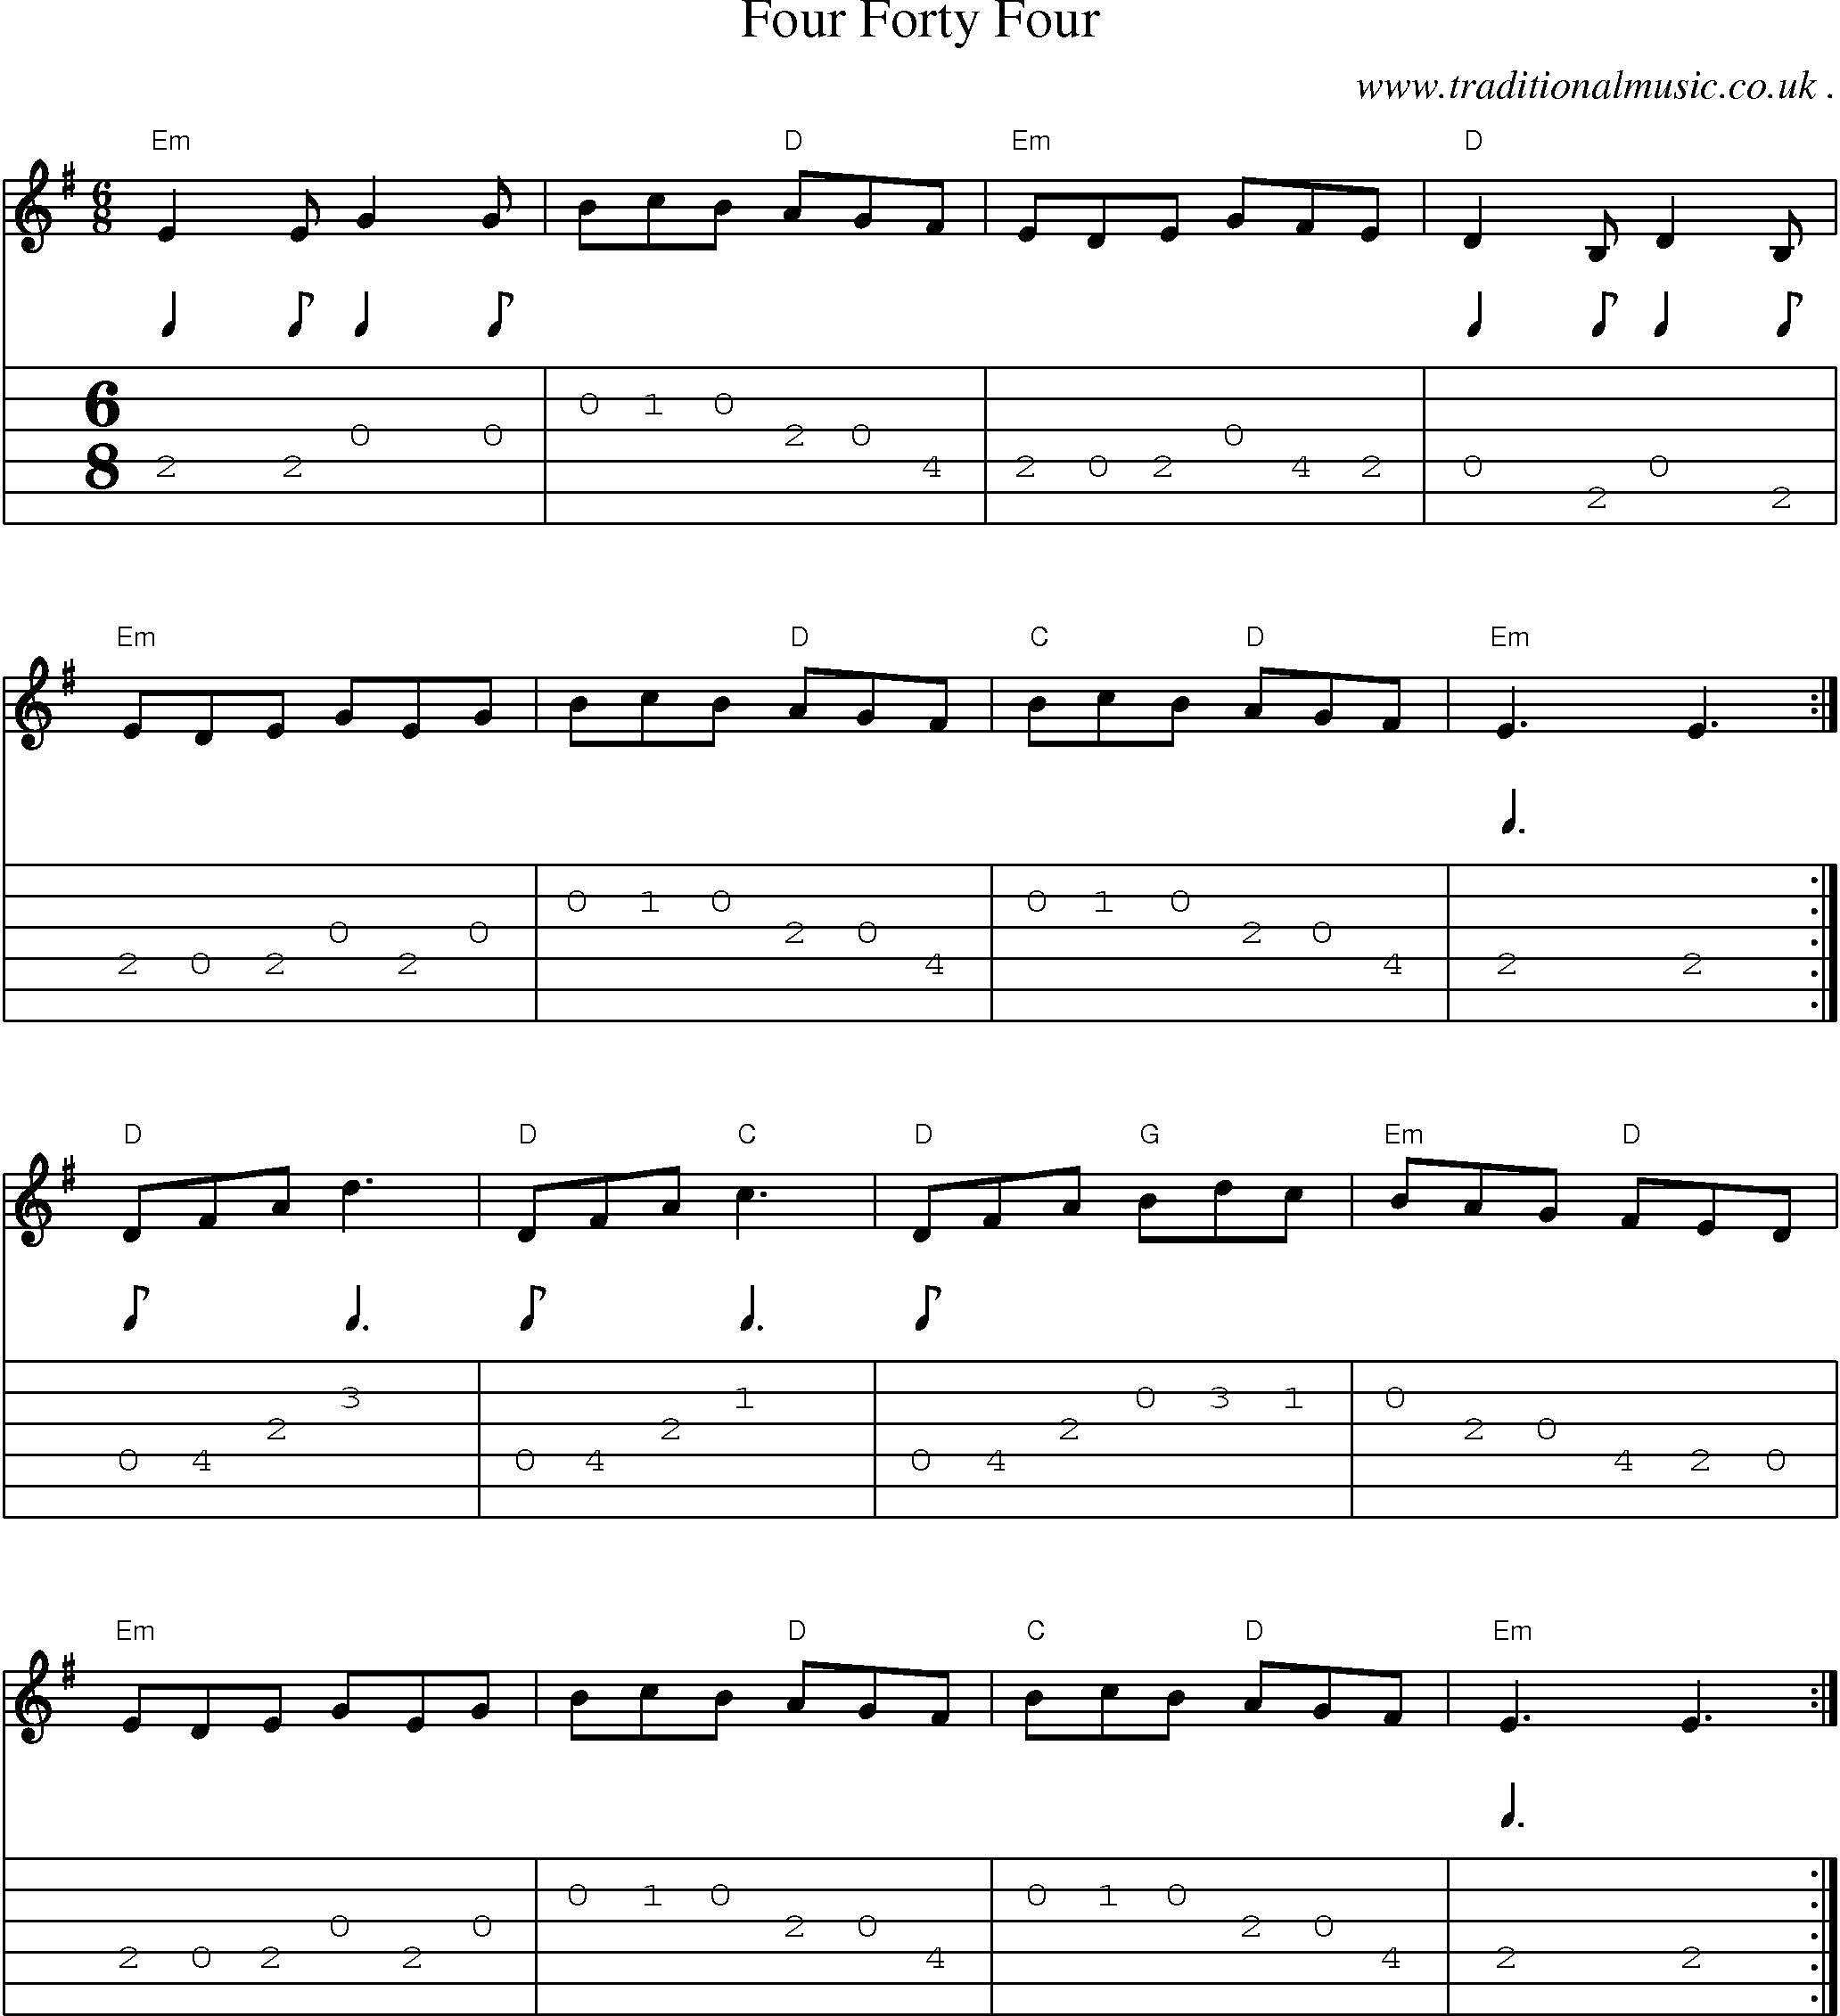 Music Score and Guitar Tabs for Four Forty Four